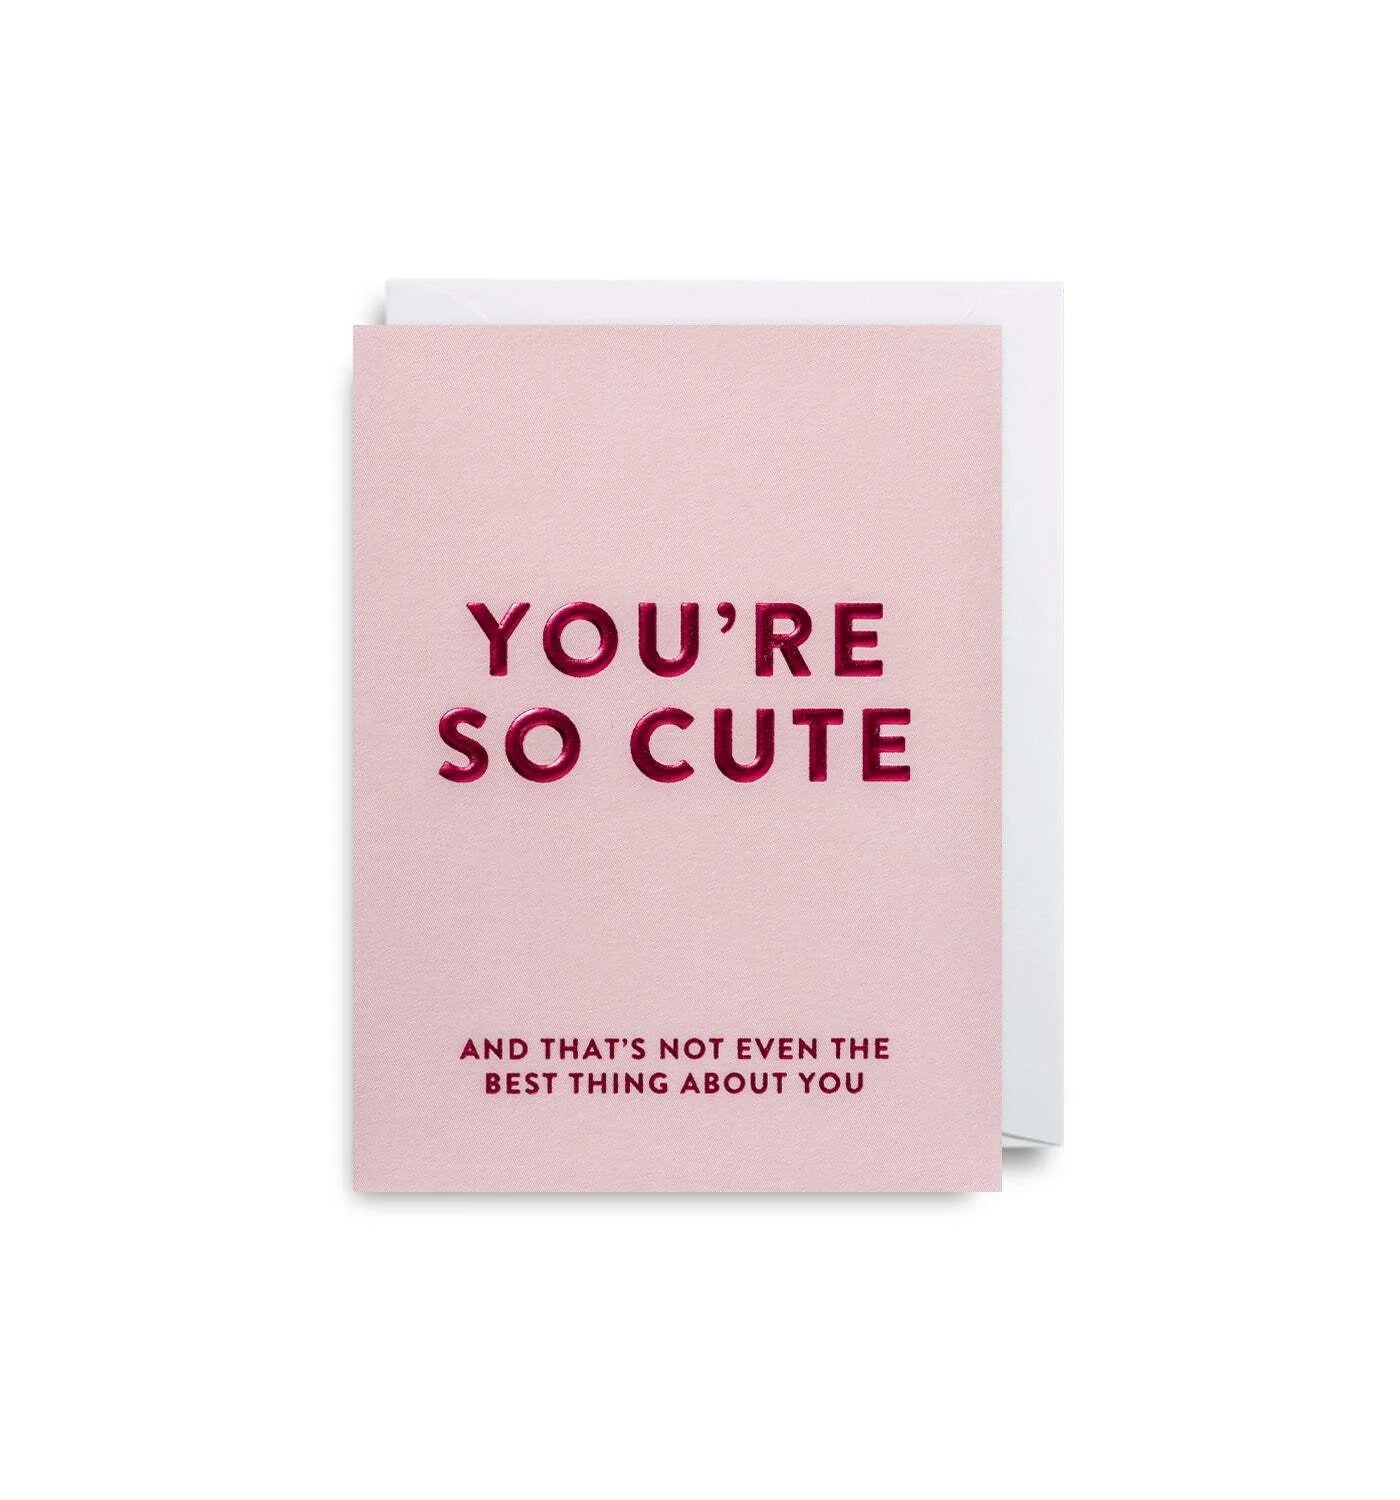 pink mini card with greeting "you're so cute and that's not even the best thing about you"